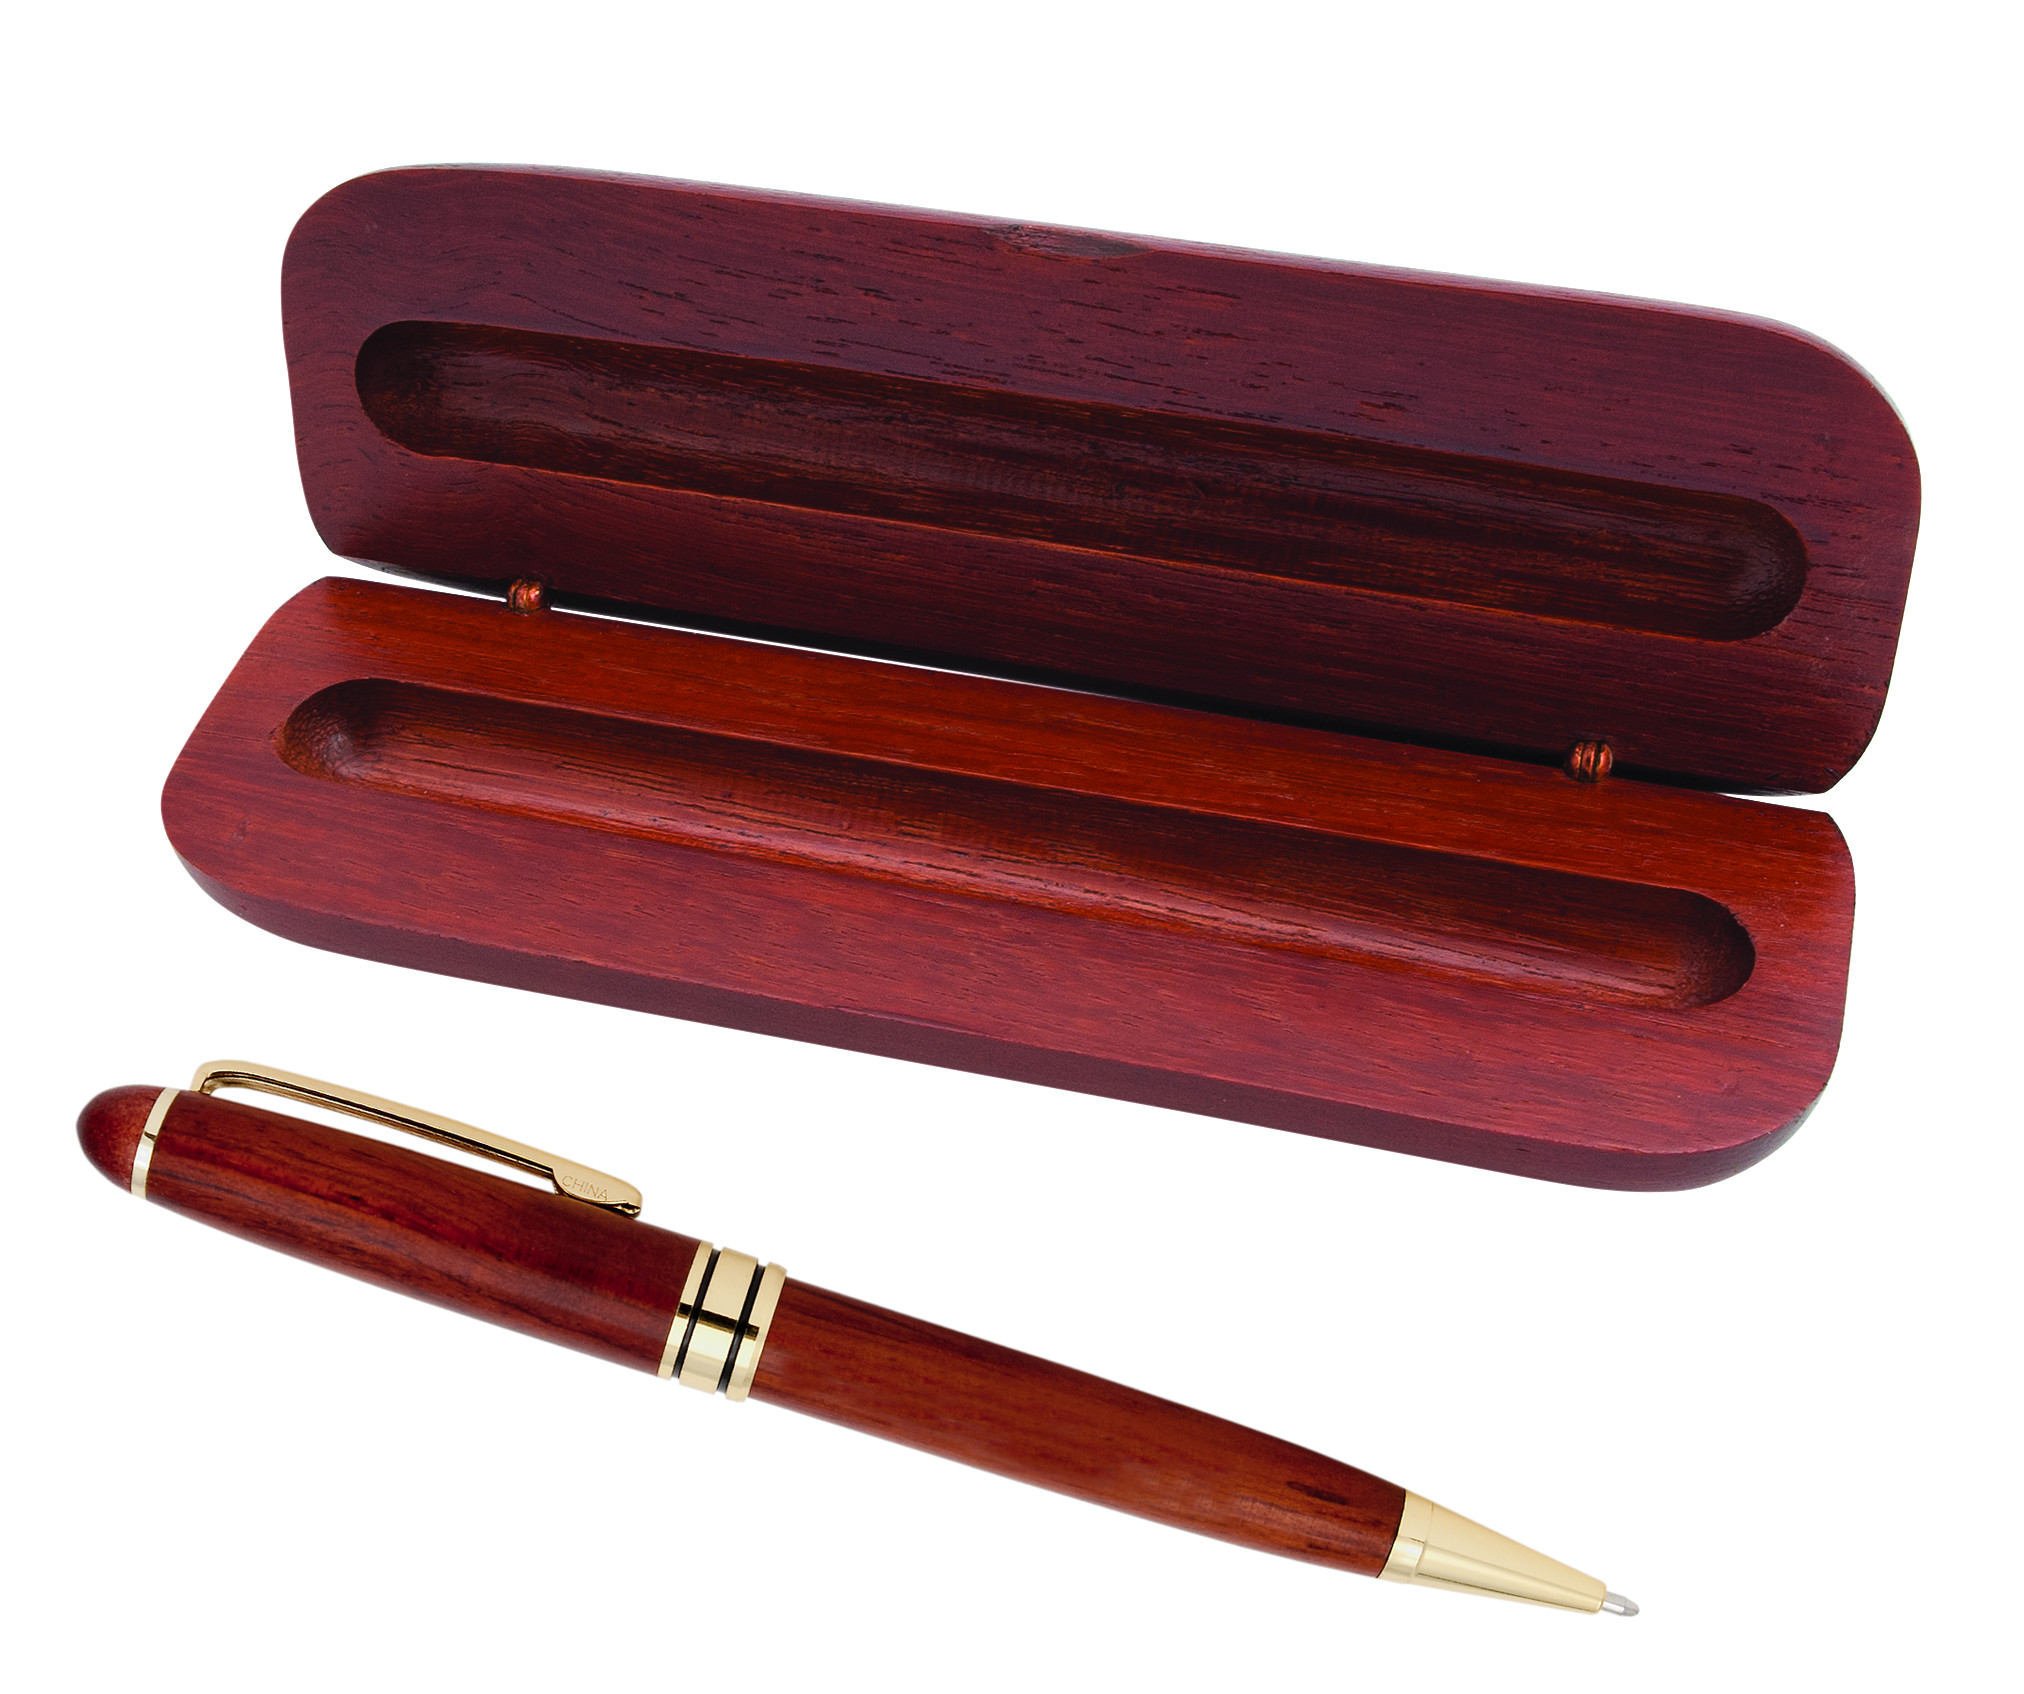 Groomsman Gift Handmade Gift Gift for Her Wedding Gift Client Gift Caribbean Rosewood Gold Pen Fathers Day Gift Gift for Him